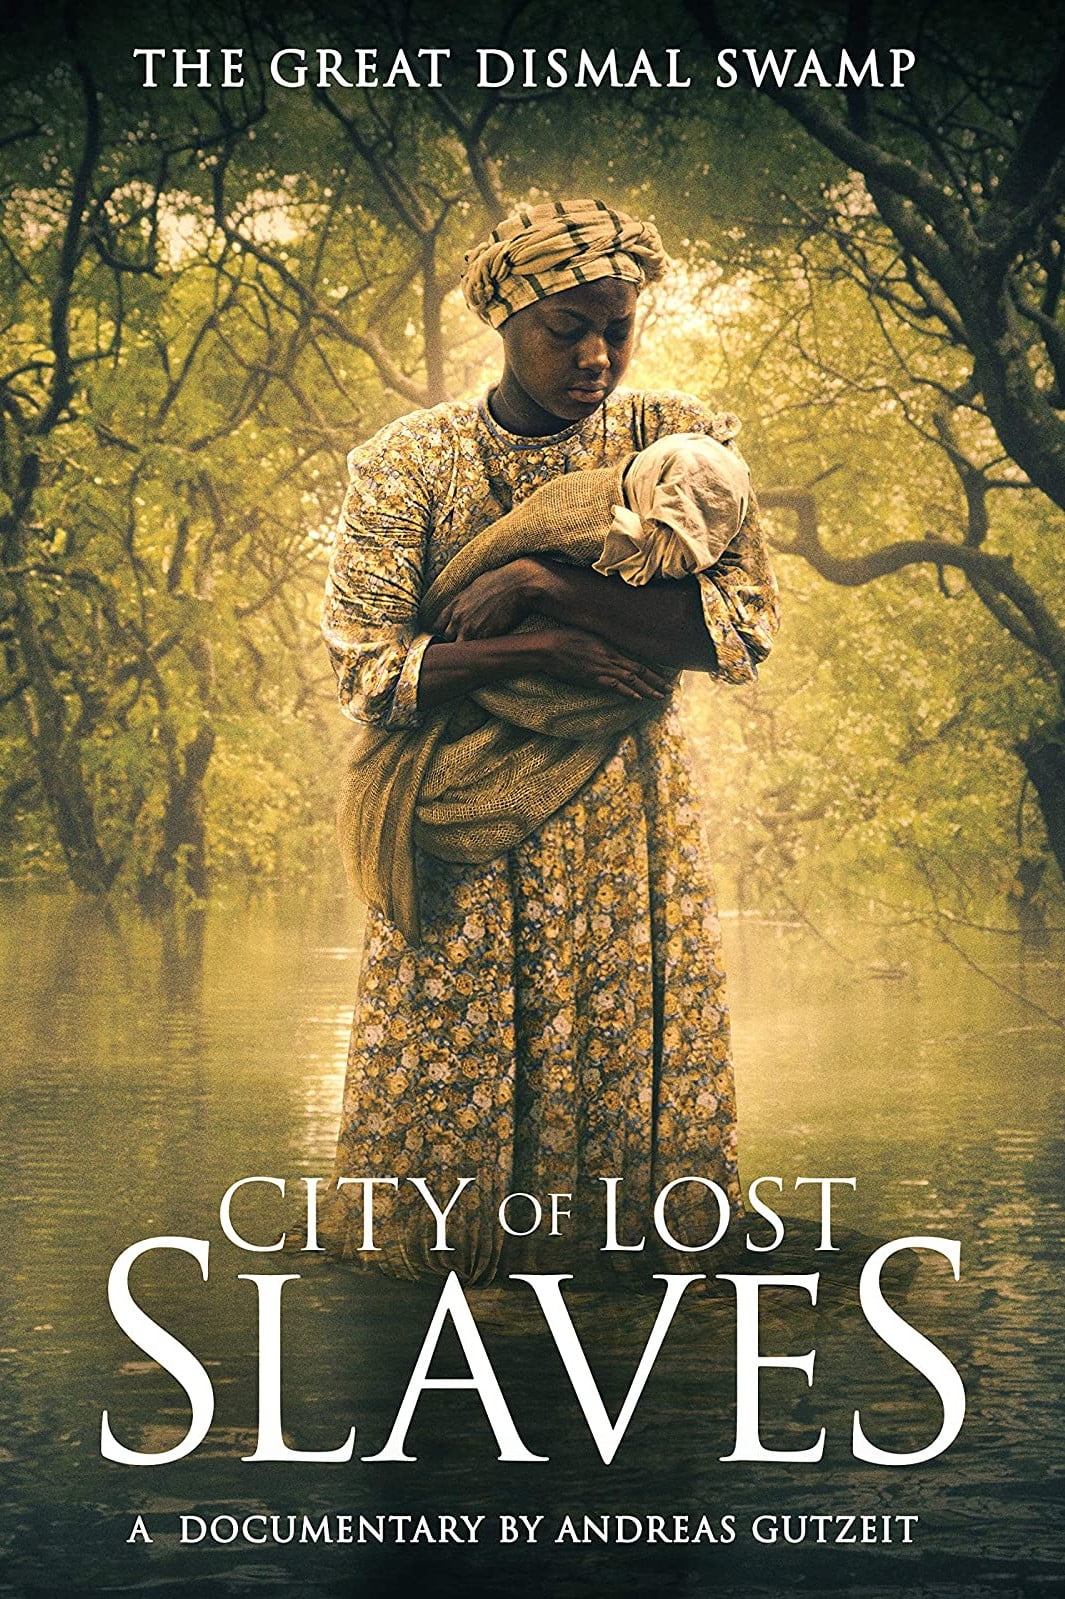 City of Lost Slaves